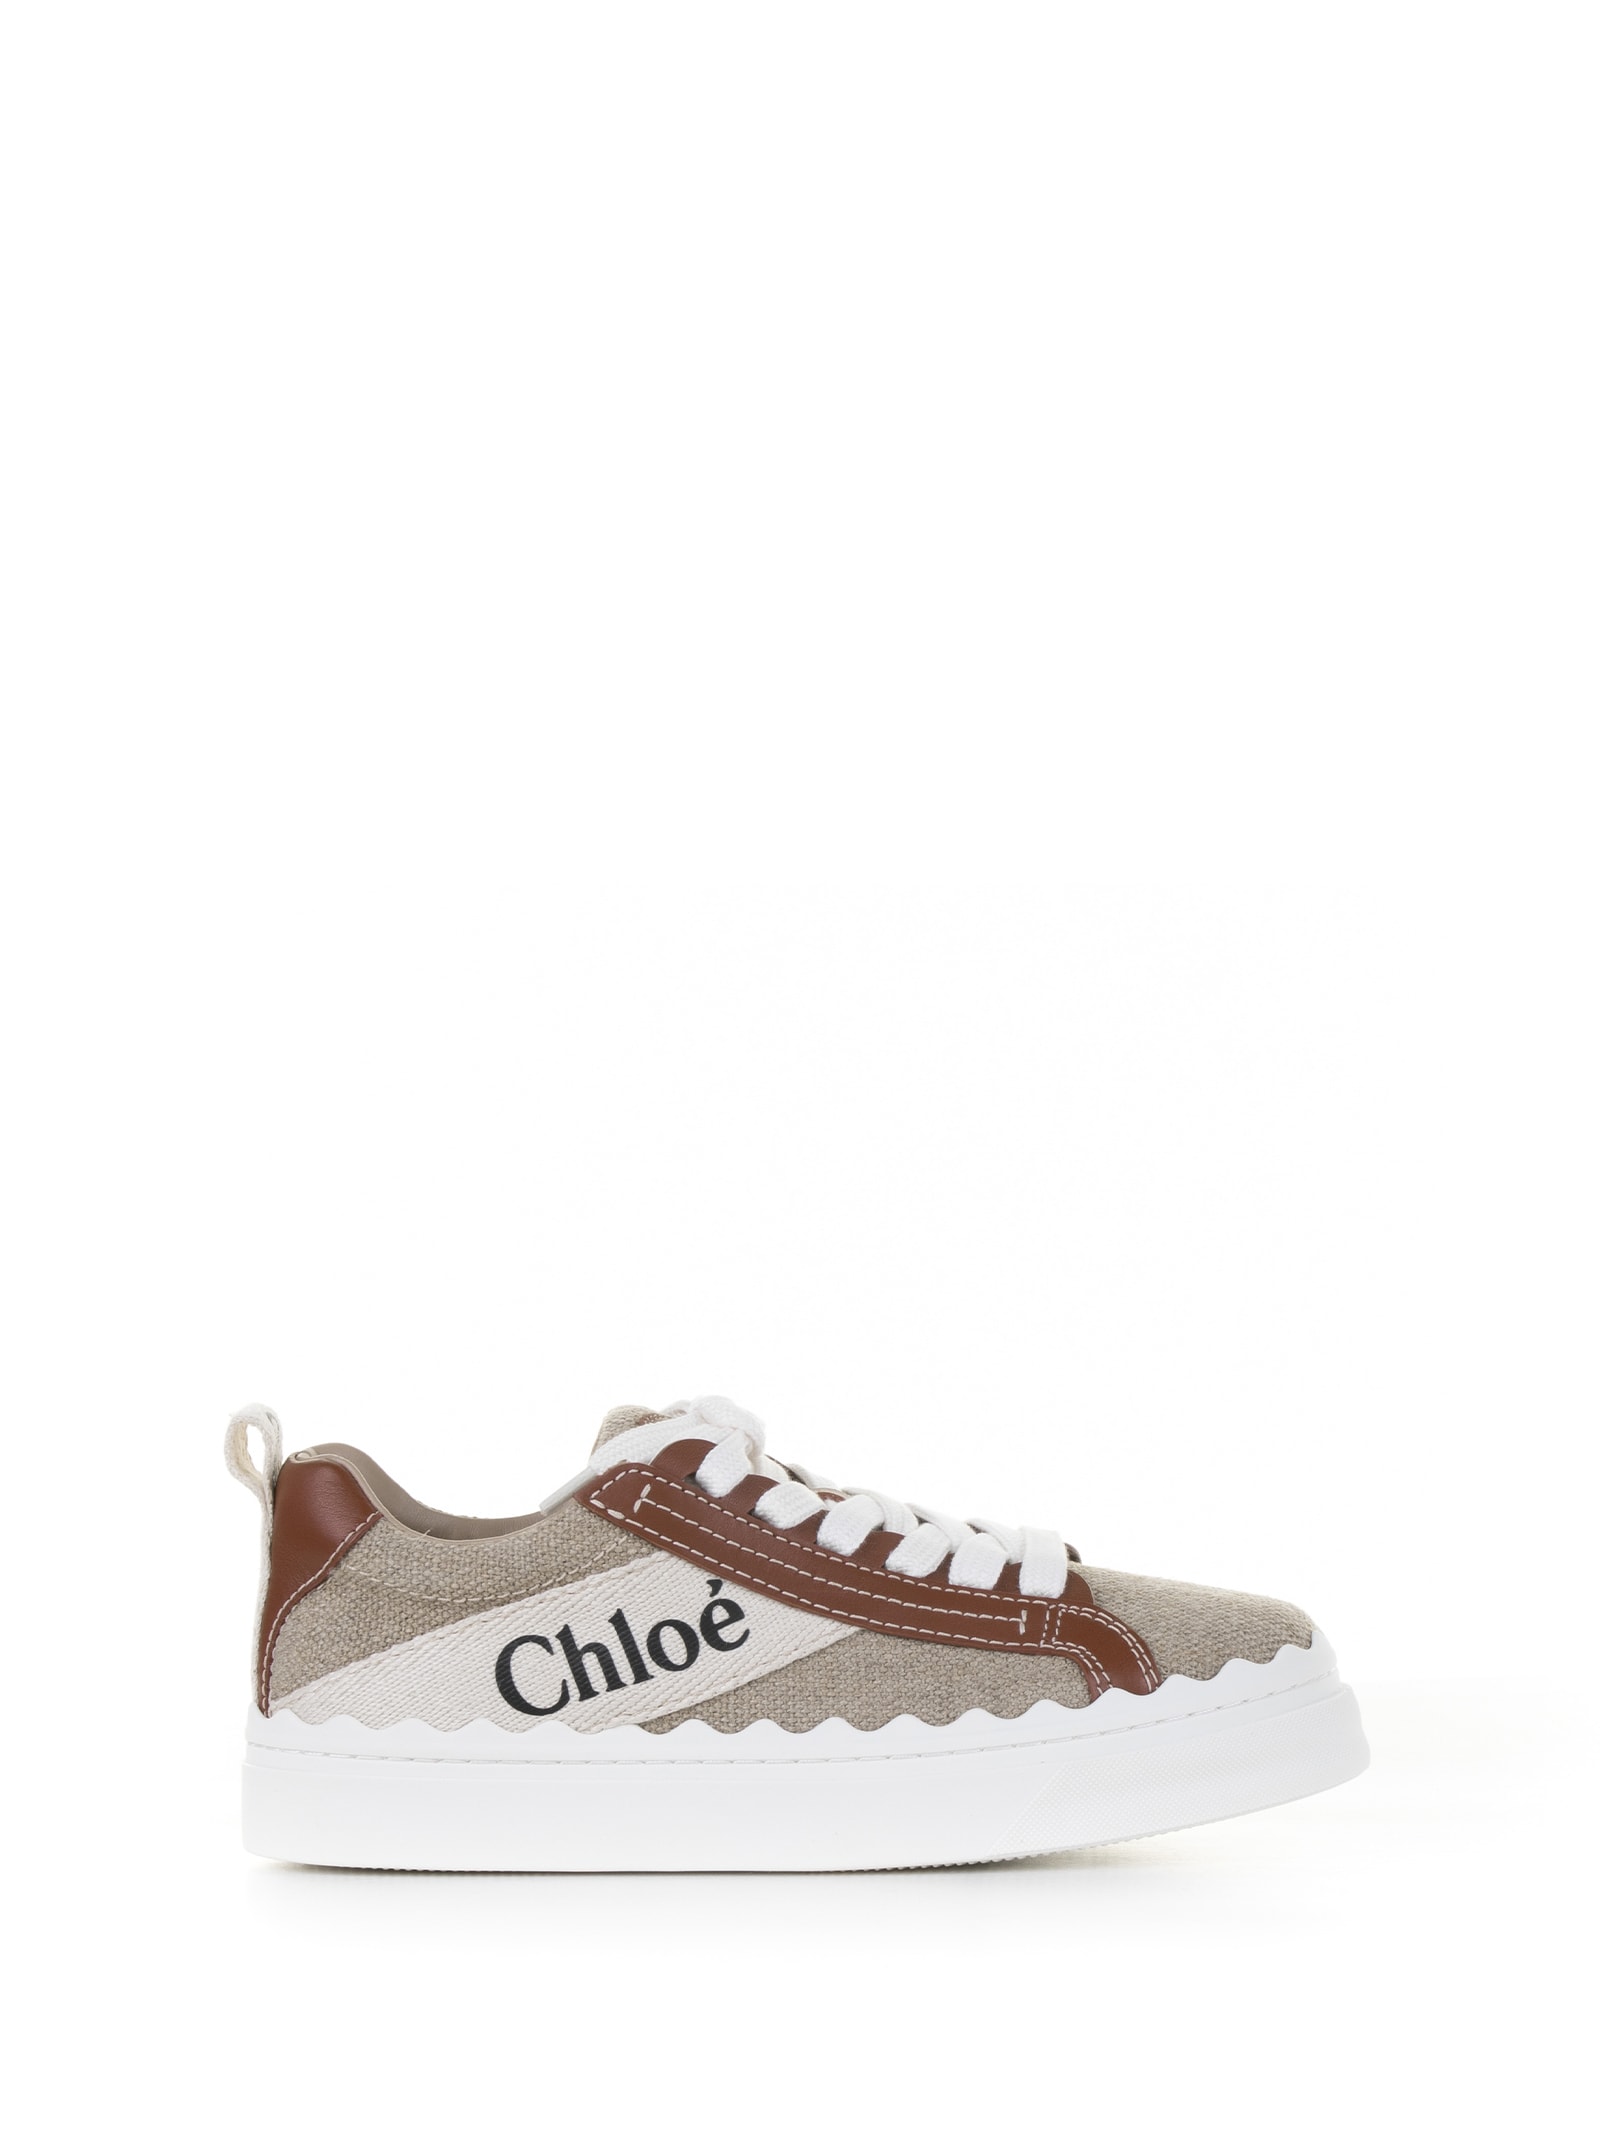 Chloé Sneakers In White Brown